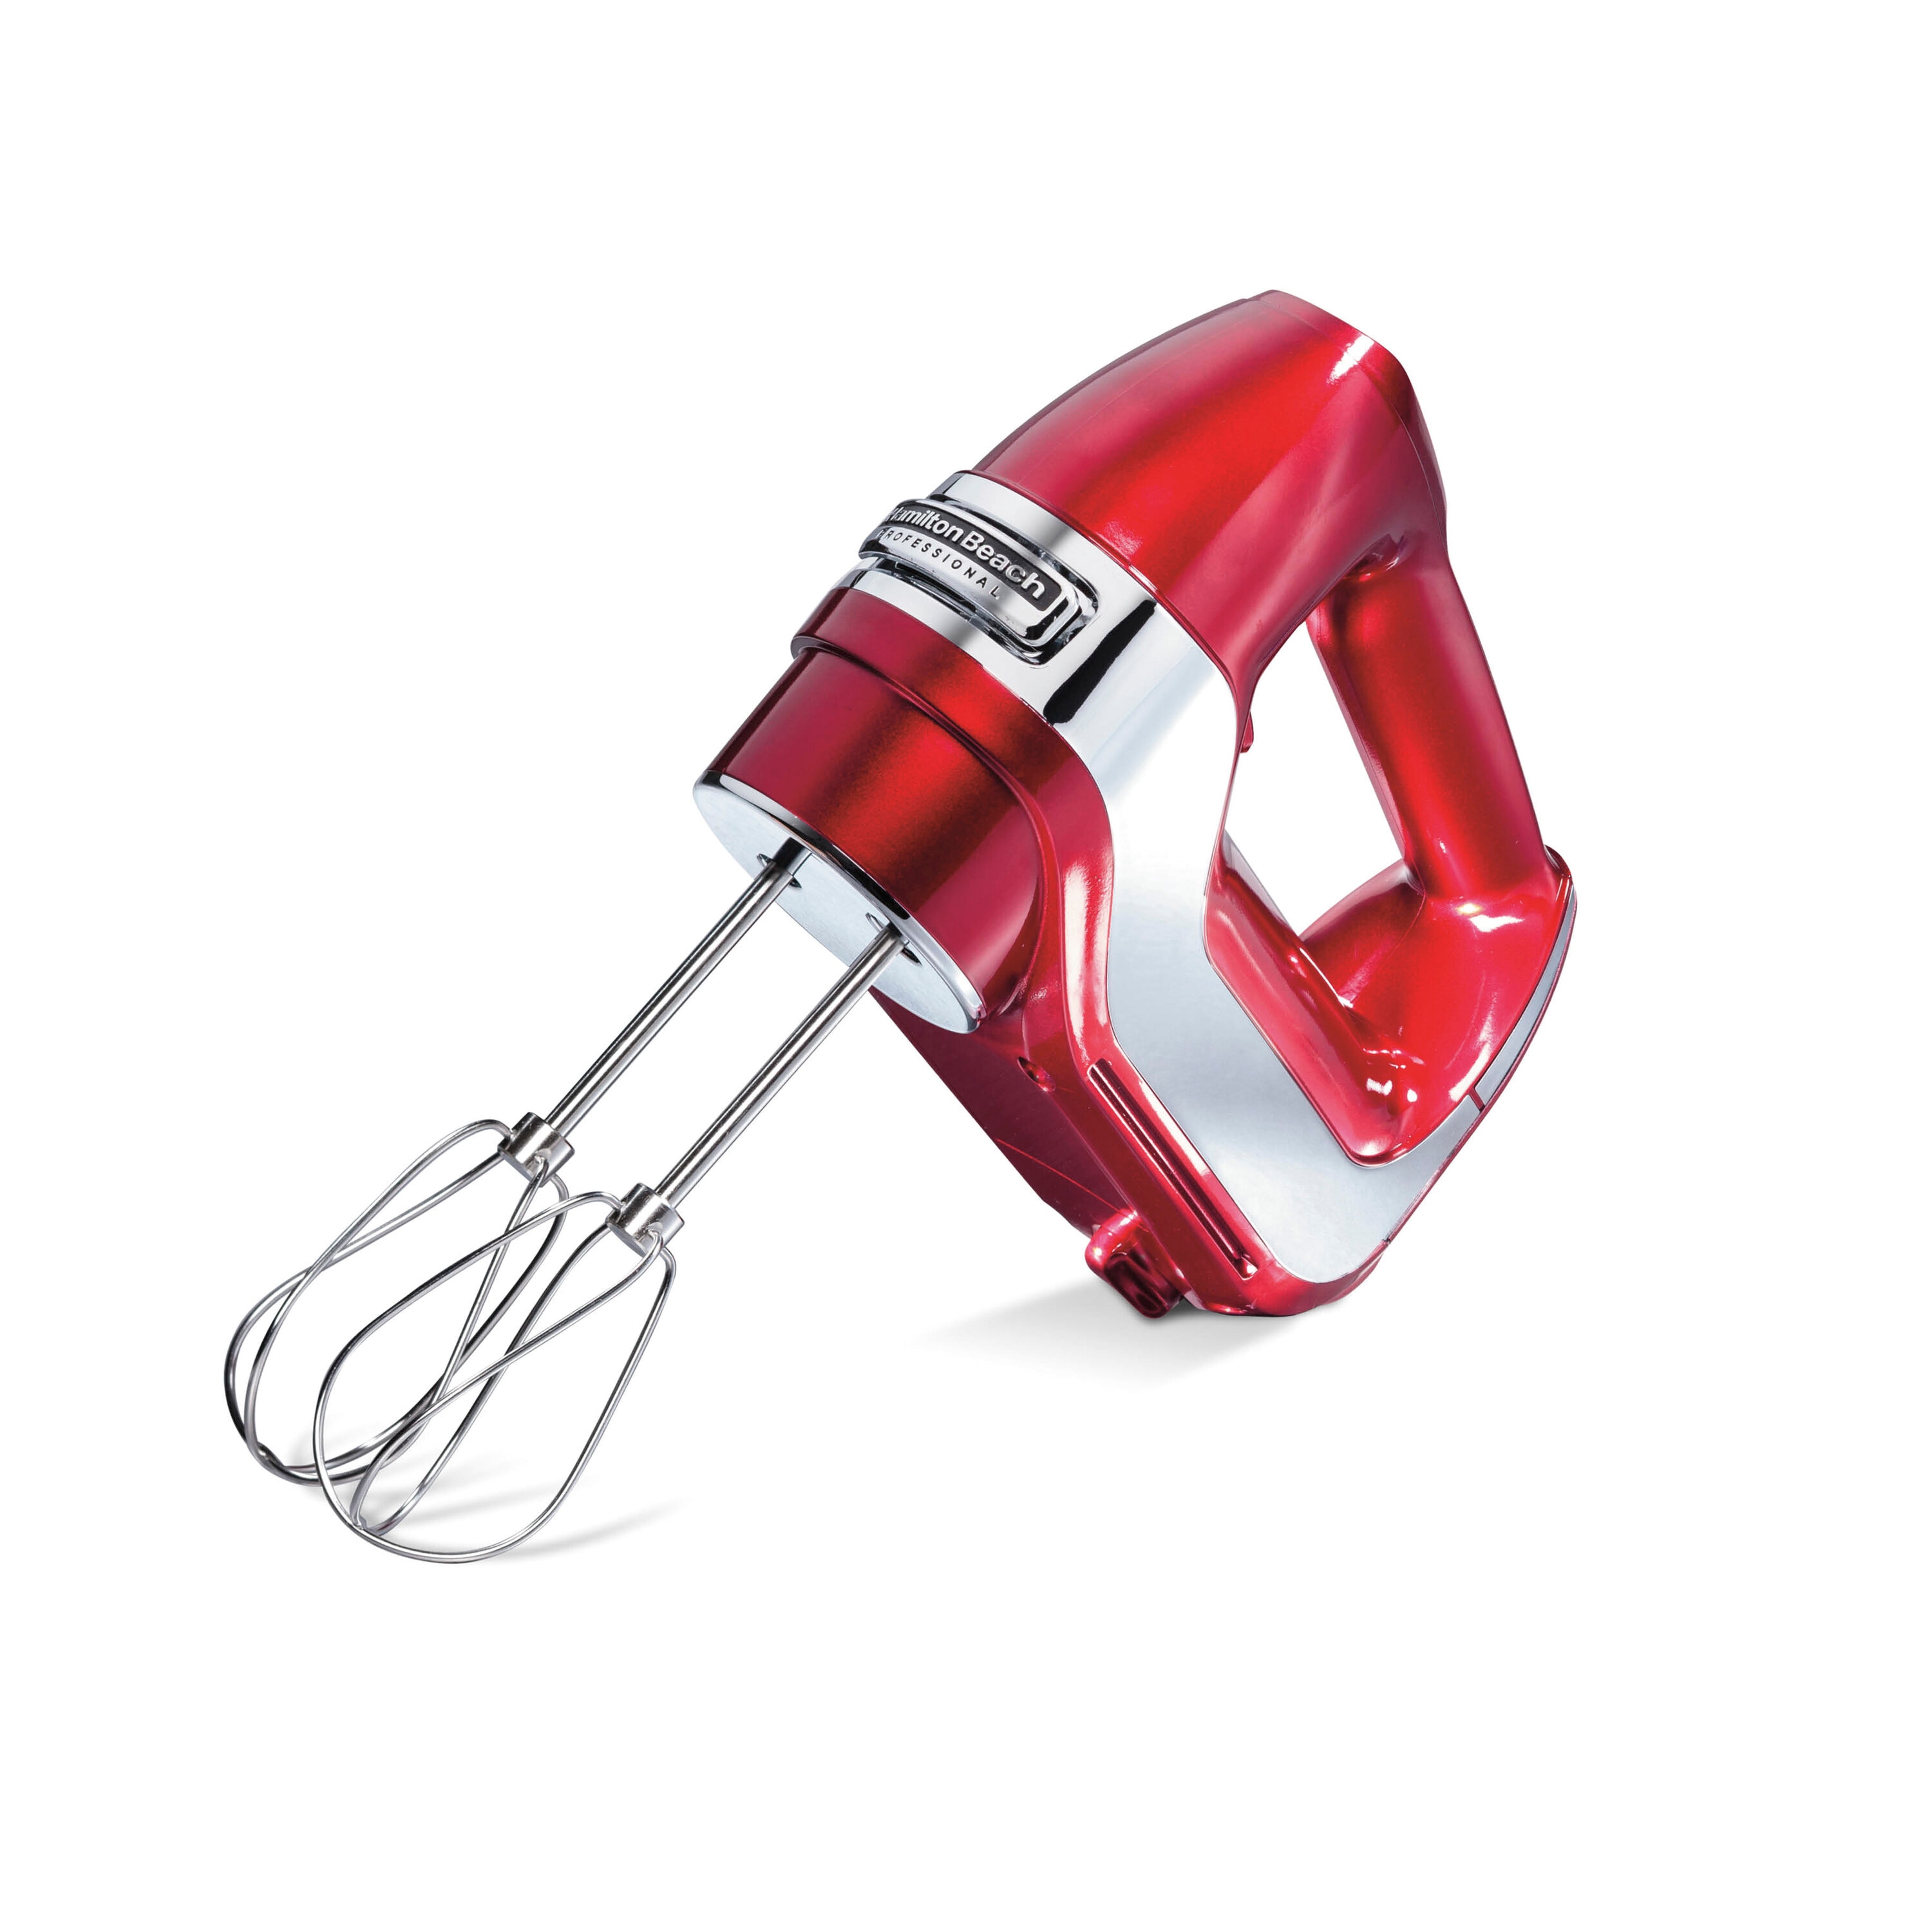 Hamilton Beach 6-Speed Electric Hand Mixer with Whisk, Traditional Beaters,  Snap-On Storage Case, Dough Hooks, Red